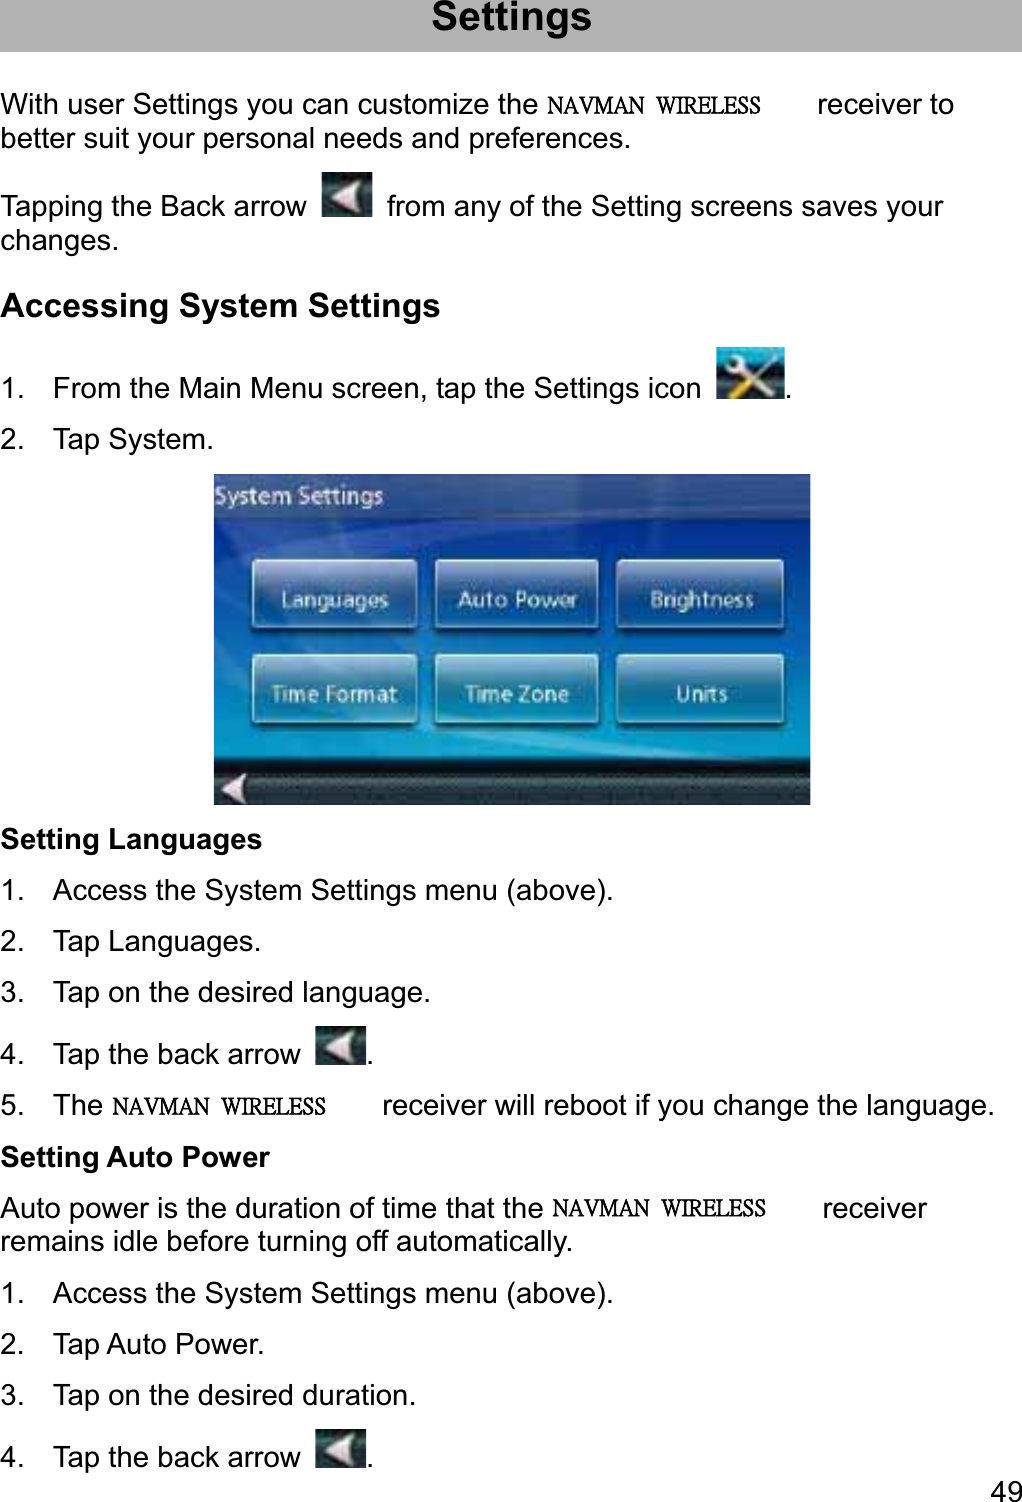 49SettingsWith user Settings you can customize the Magellan RoadMate receiver to better suit your personal needs and preferences. Tapping the Back arrow    from any of the Setting screens saves your changes. Accessing System Settings 1.  From the Main Menu screen, tap the Settings icon  .2. Tap System. Setting Languages 1.  Access the System Settings menu (above). 2. Tap Languages. 3.  Tap on the desired language. 4.  Tap the back arrow  .5.  The Magellan RoadMate receiver will reboot if you change the language. Setting Auto Power Auto power is the duration of time that the Magellan RoadMate receiver remains idle before turning off automatically. 1.  Access the System Settings menu (above). 2. Tap Auto Power. 3.  Tap on the desired duration. 4.  Tap the back arrow  .ʳˡ˔˩ˠ˔ˡʳʳ˪˜˥˘˟˘˦˦ʳˡ˔˩ˠ˔ˡʳʳ˪˜˥˘˟˘˦˦ʳˡ˔˩ˠ˔ˡʳʳ˪˜˥˘˟˘˦˦